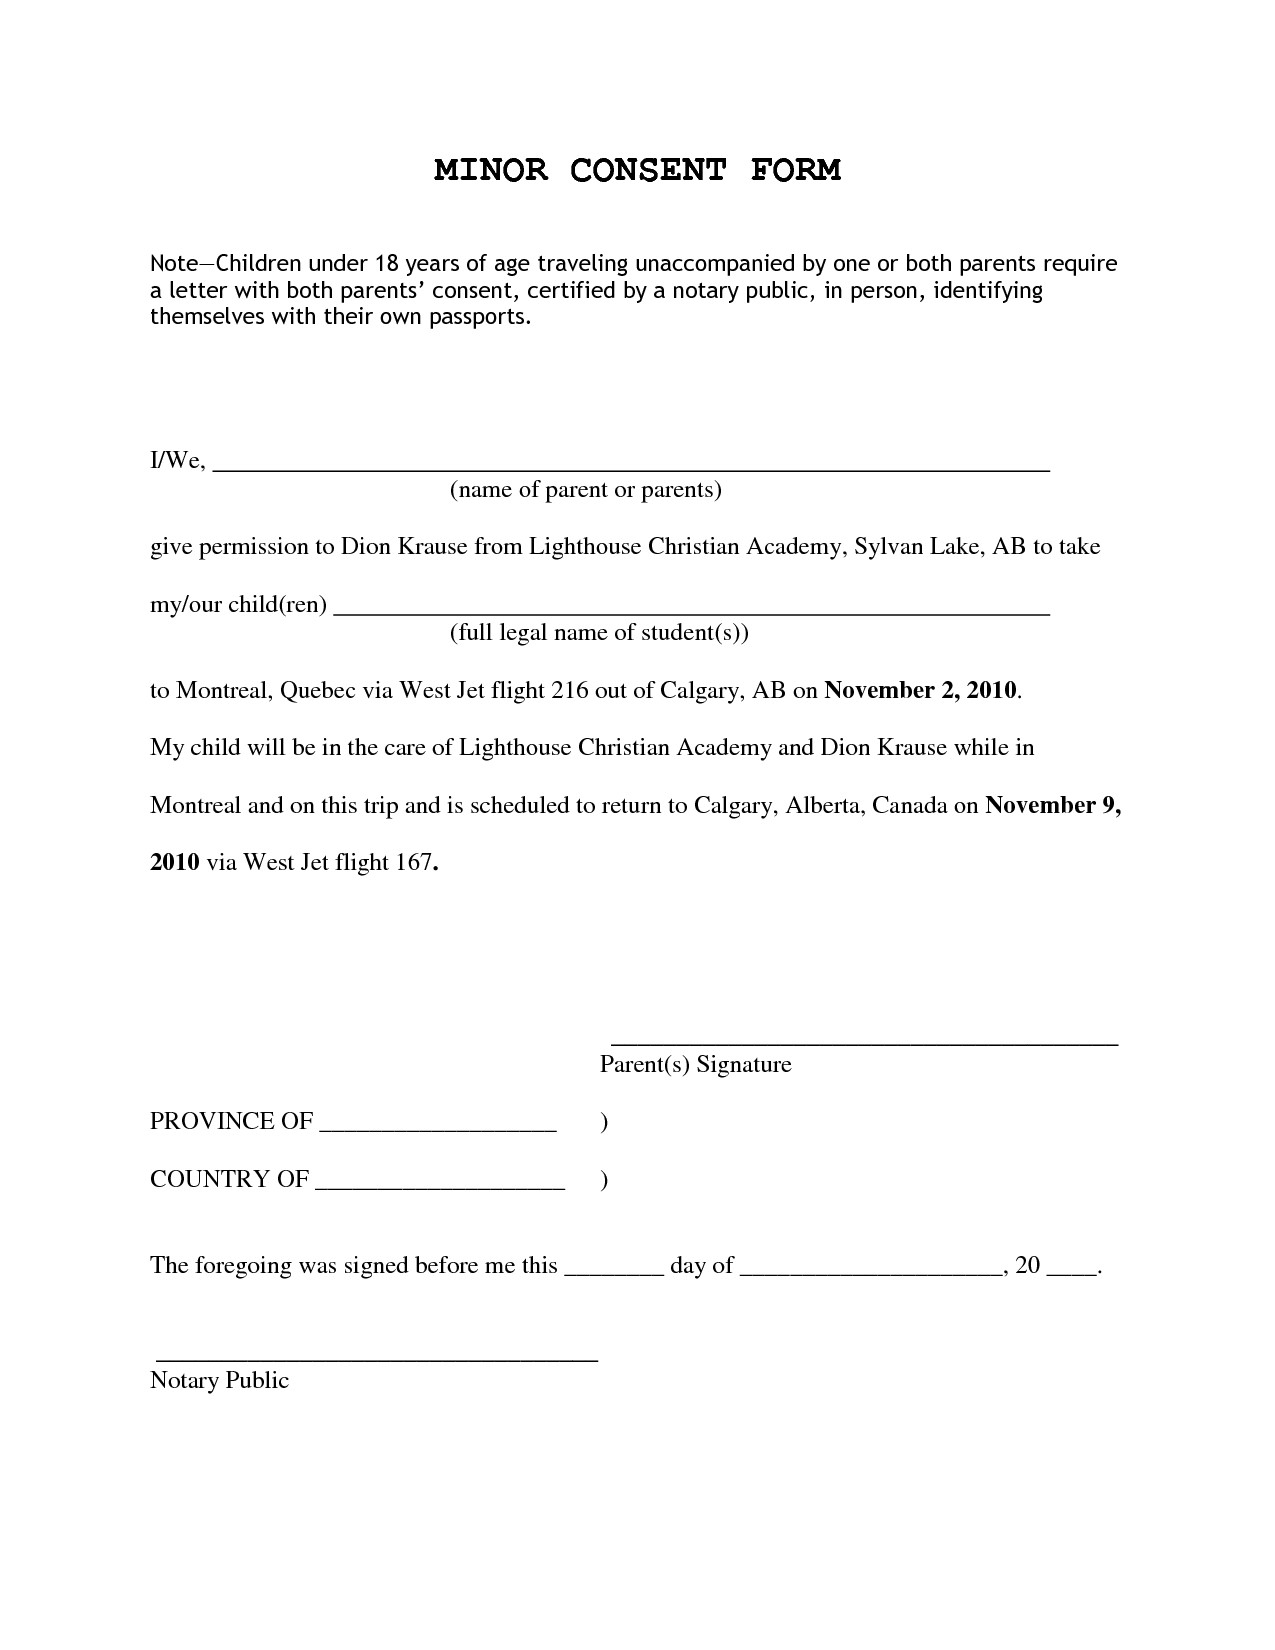 premission to use notarized letter template